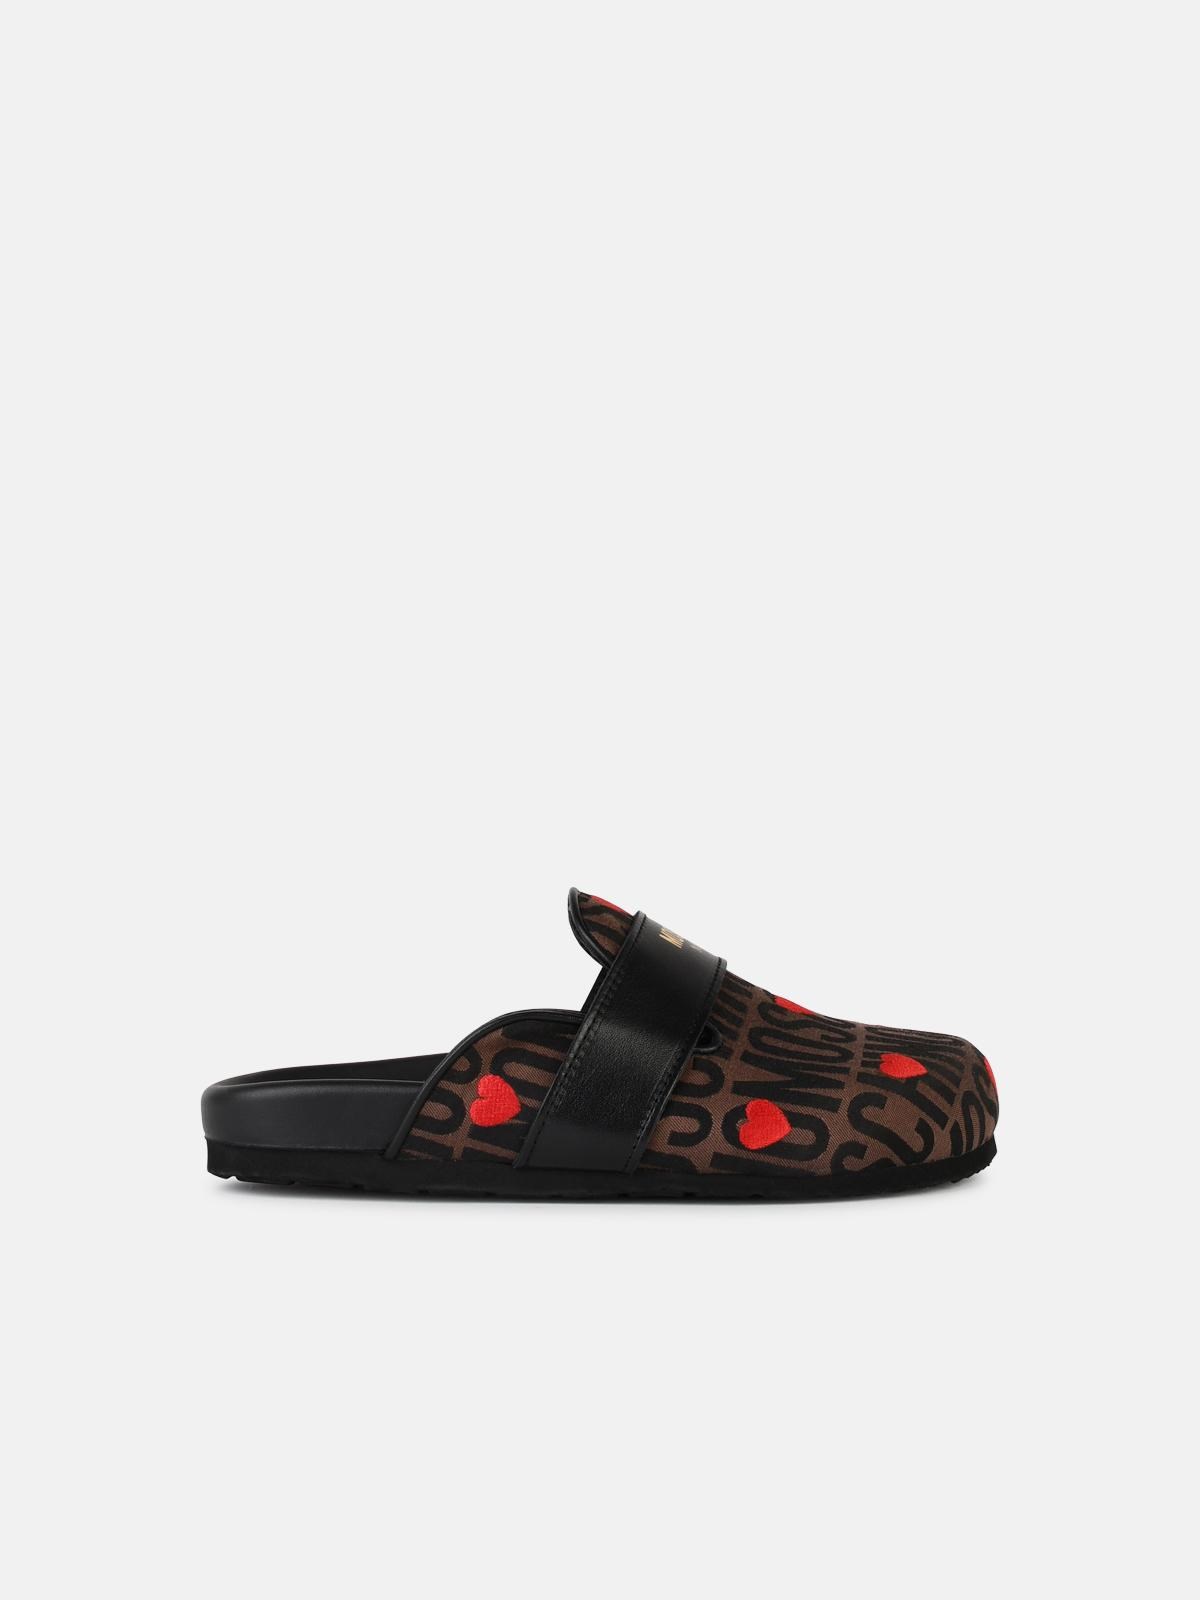 Moschino Logo Brown Leather Blend Slippers